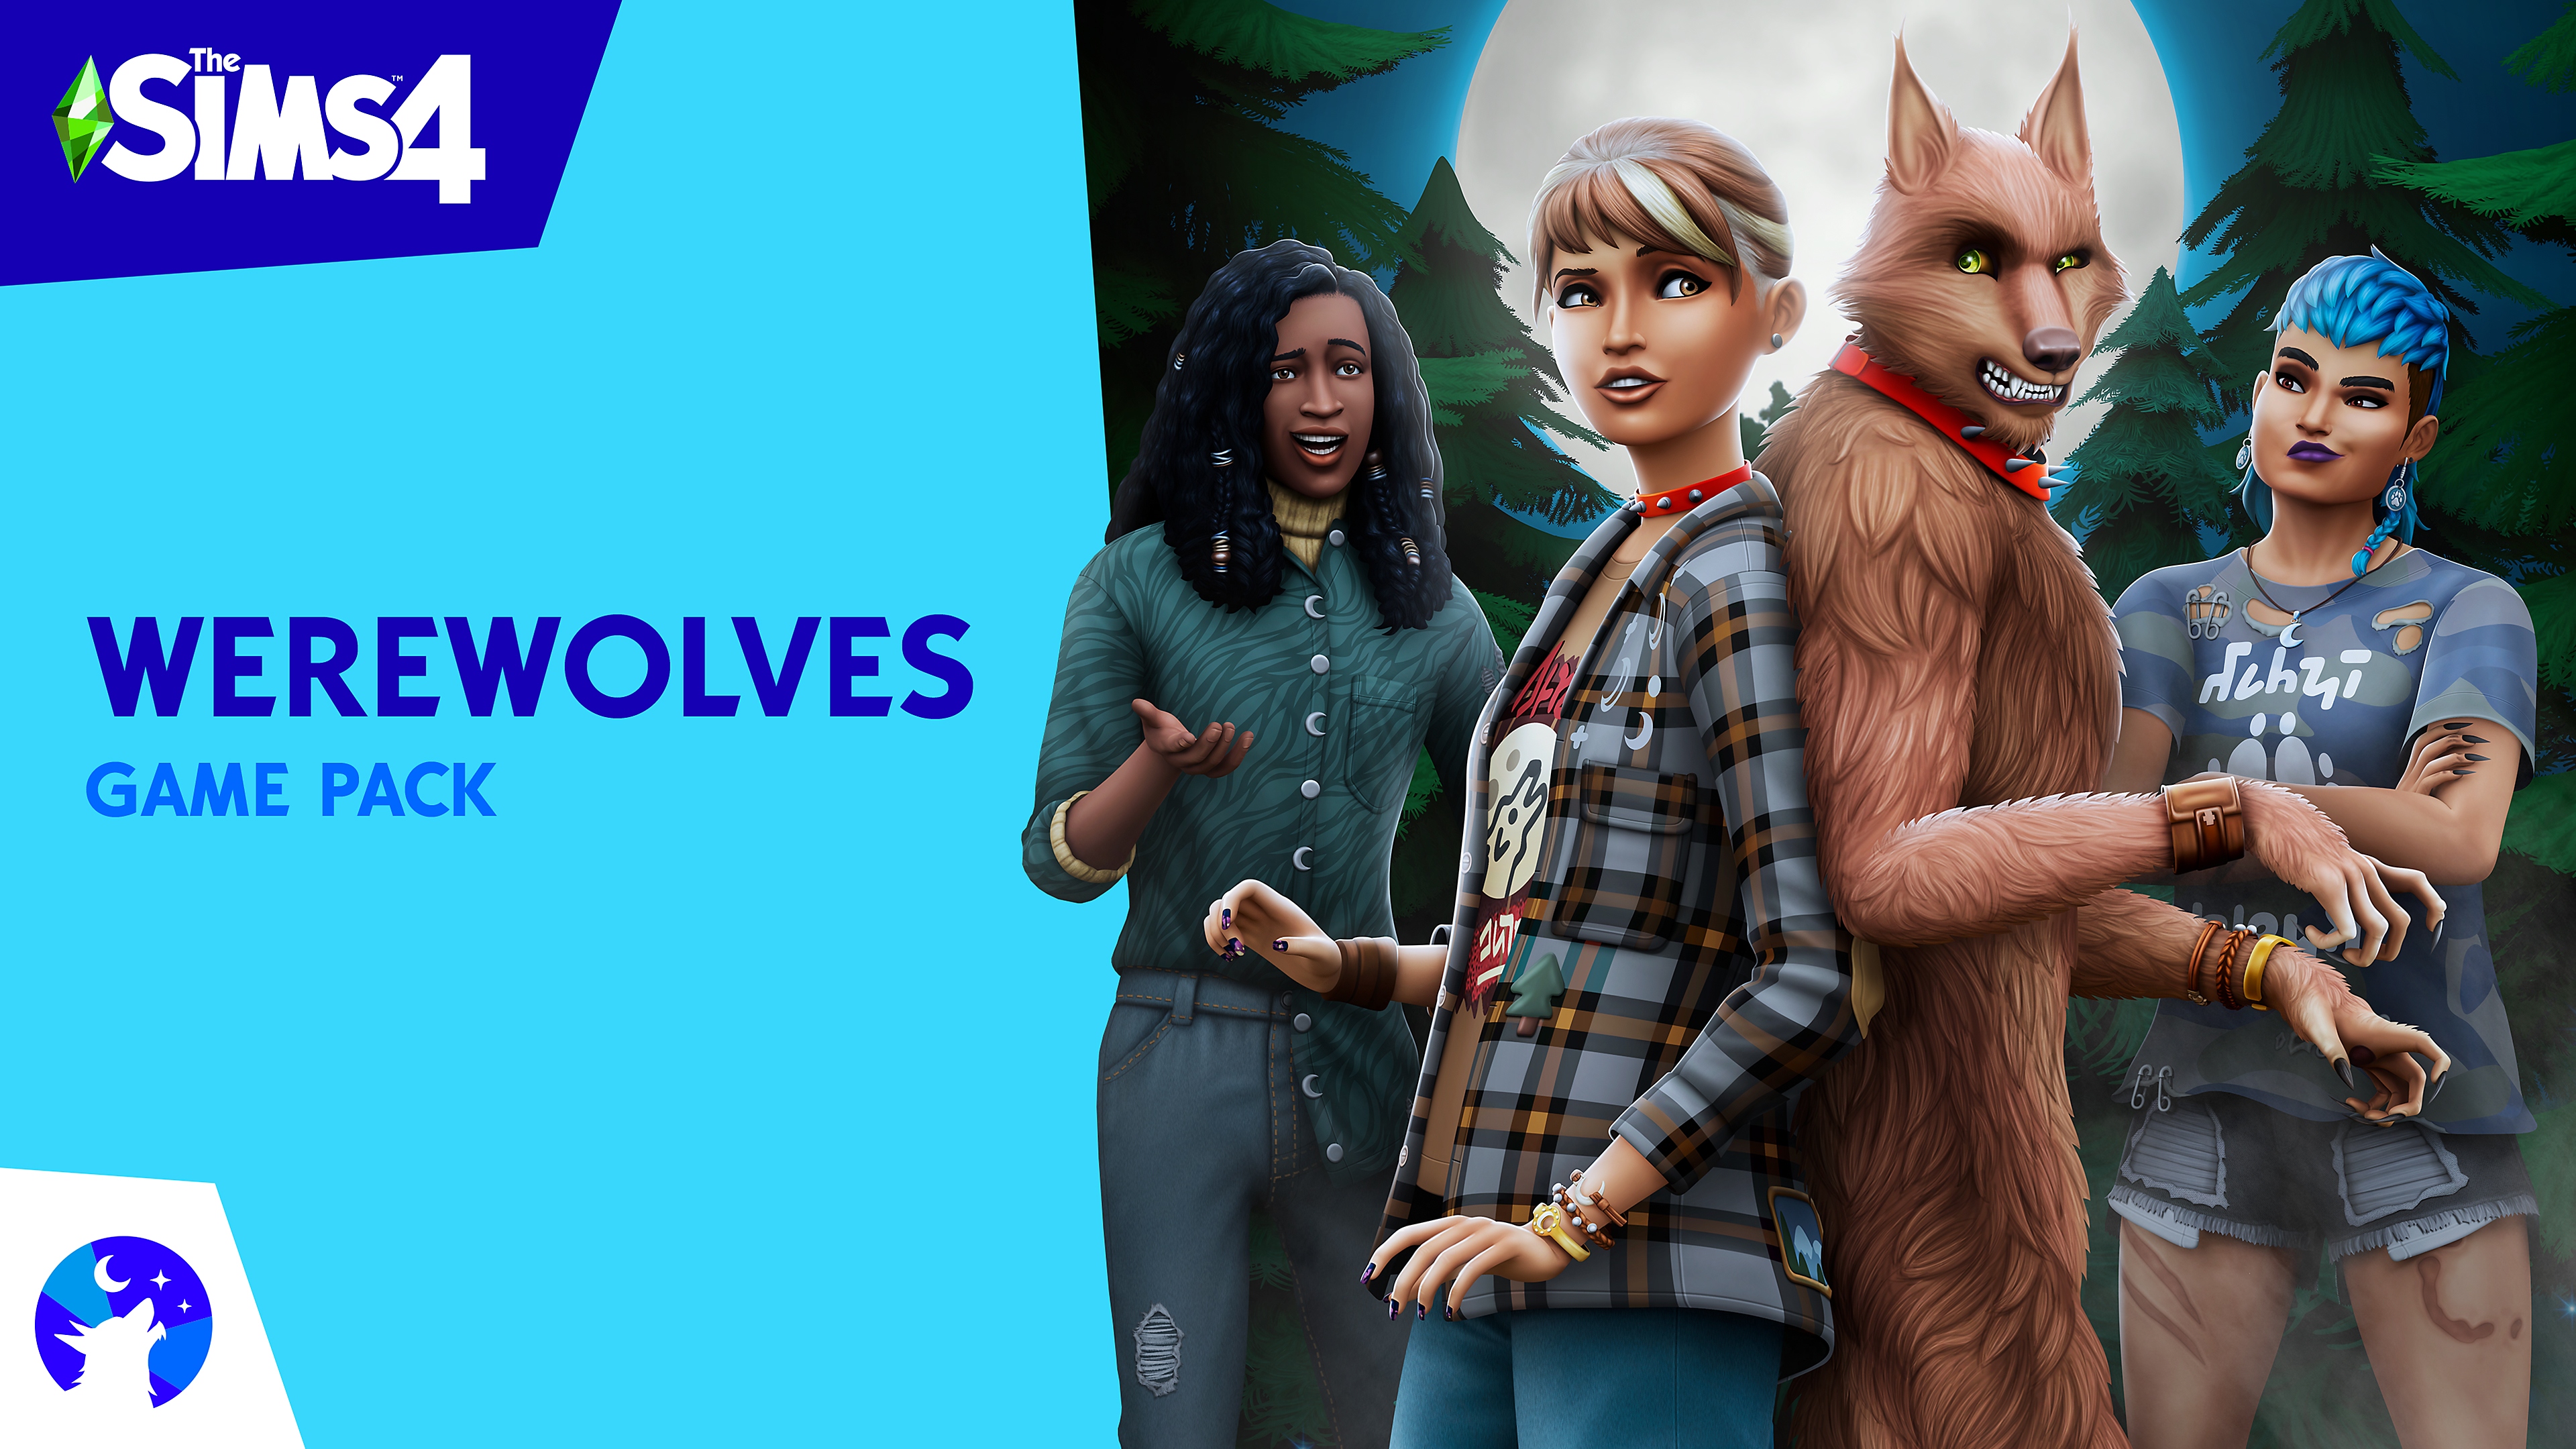 The Sims 4 Werewolves game pack key art featuring Sims characters and a werewolf